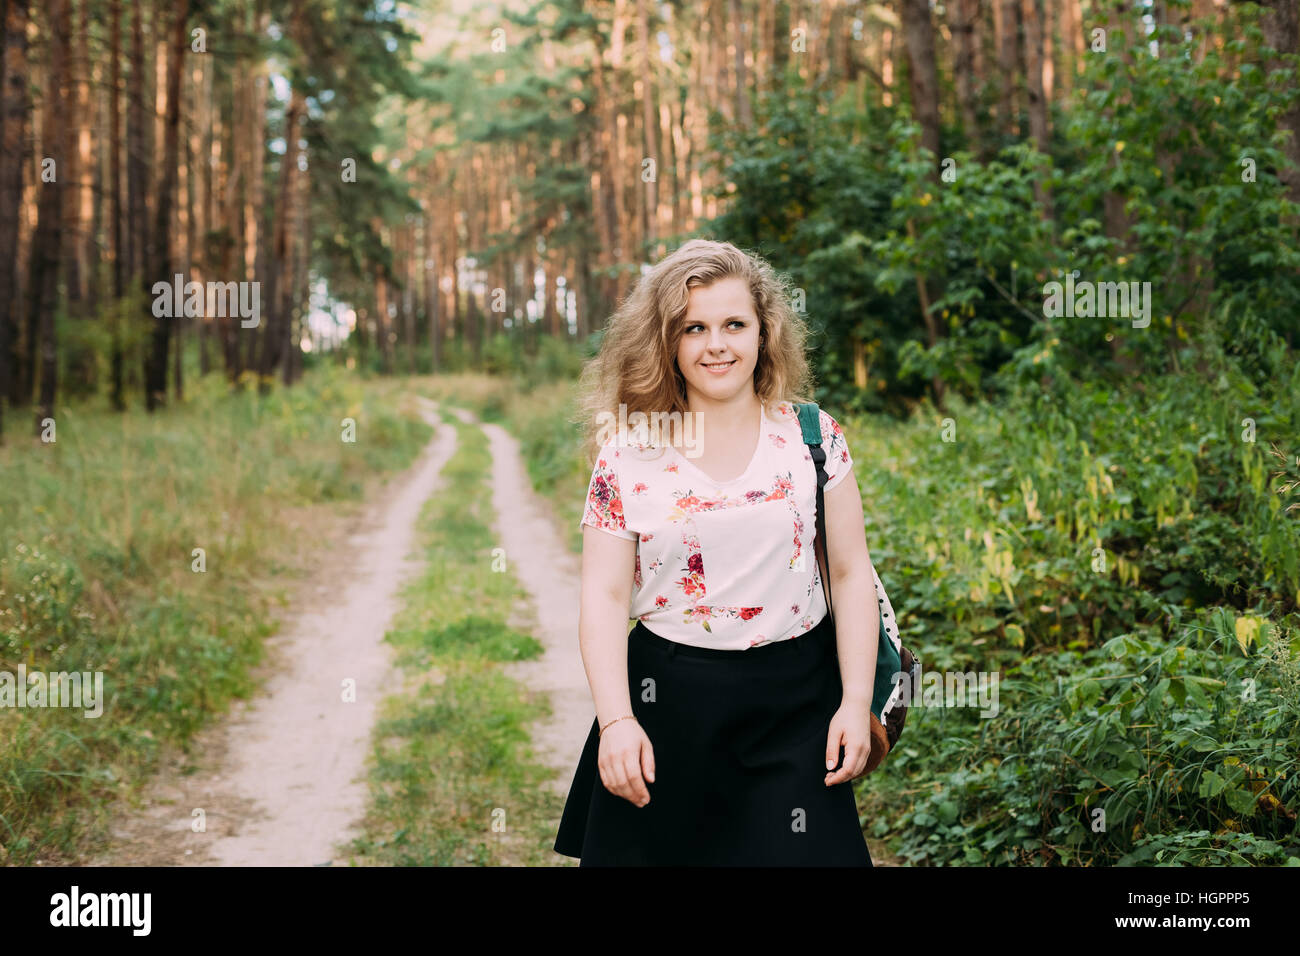 Young Pretty Plus Size Caucasian Happy Smiling Girl Woman In White T-Shirt And Black Short Skirt Walking Full-Length On Road In Summer Pine Forest Stock Photo